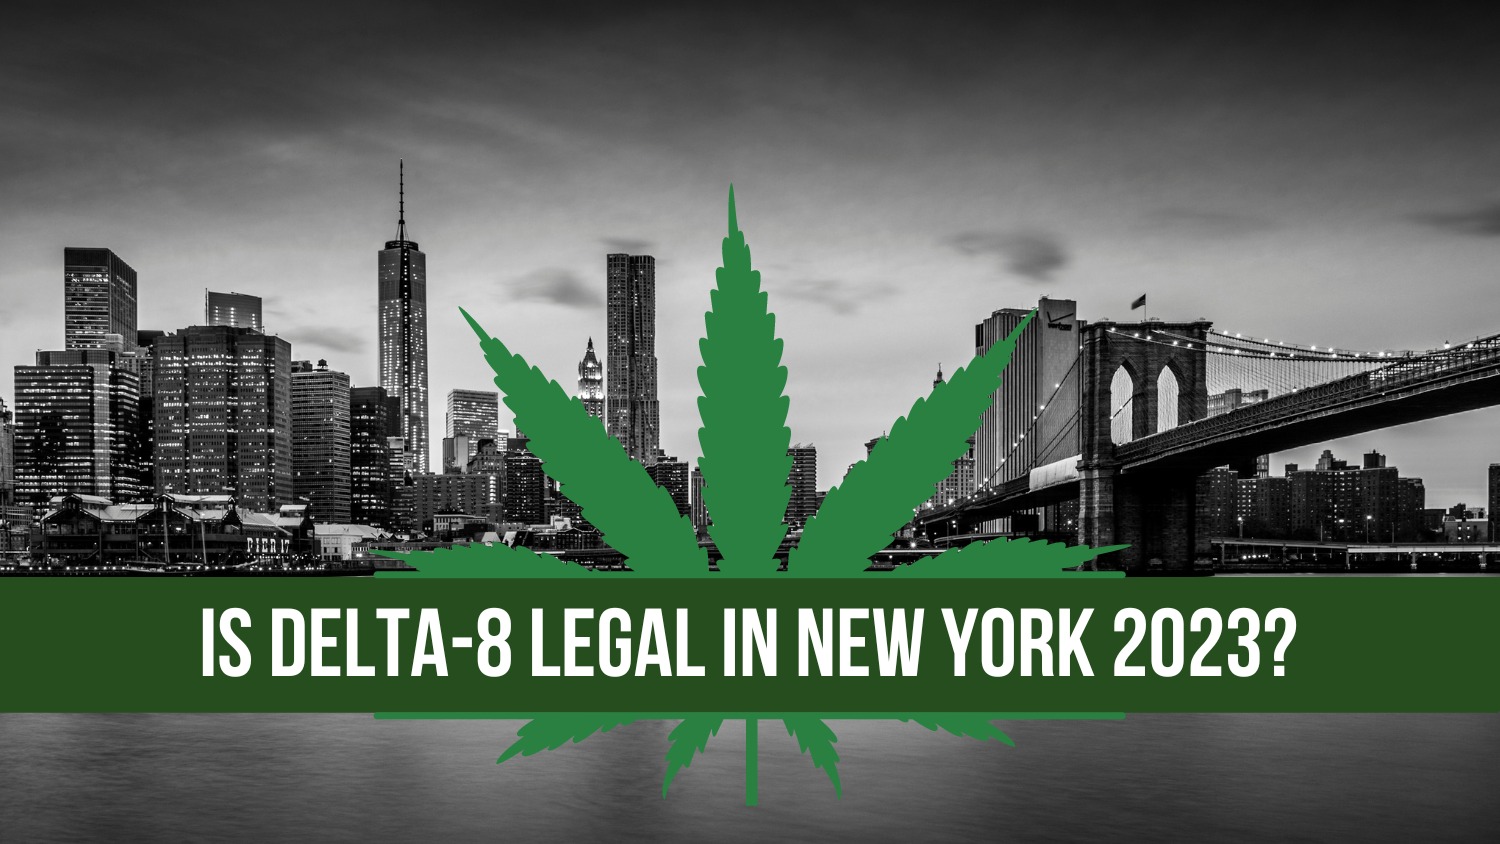 is delta-8 legal in new york 2023 on 50 shades of green